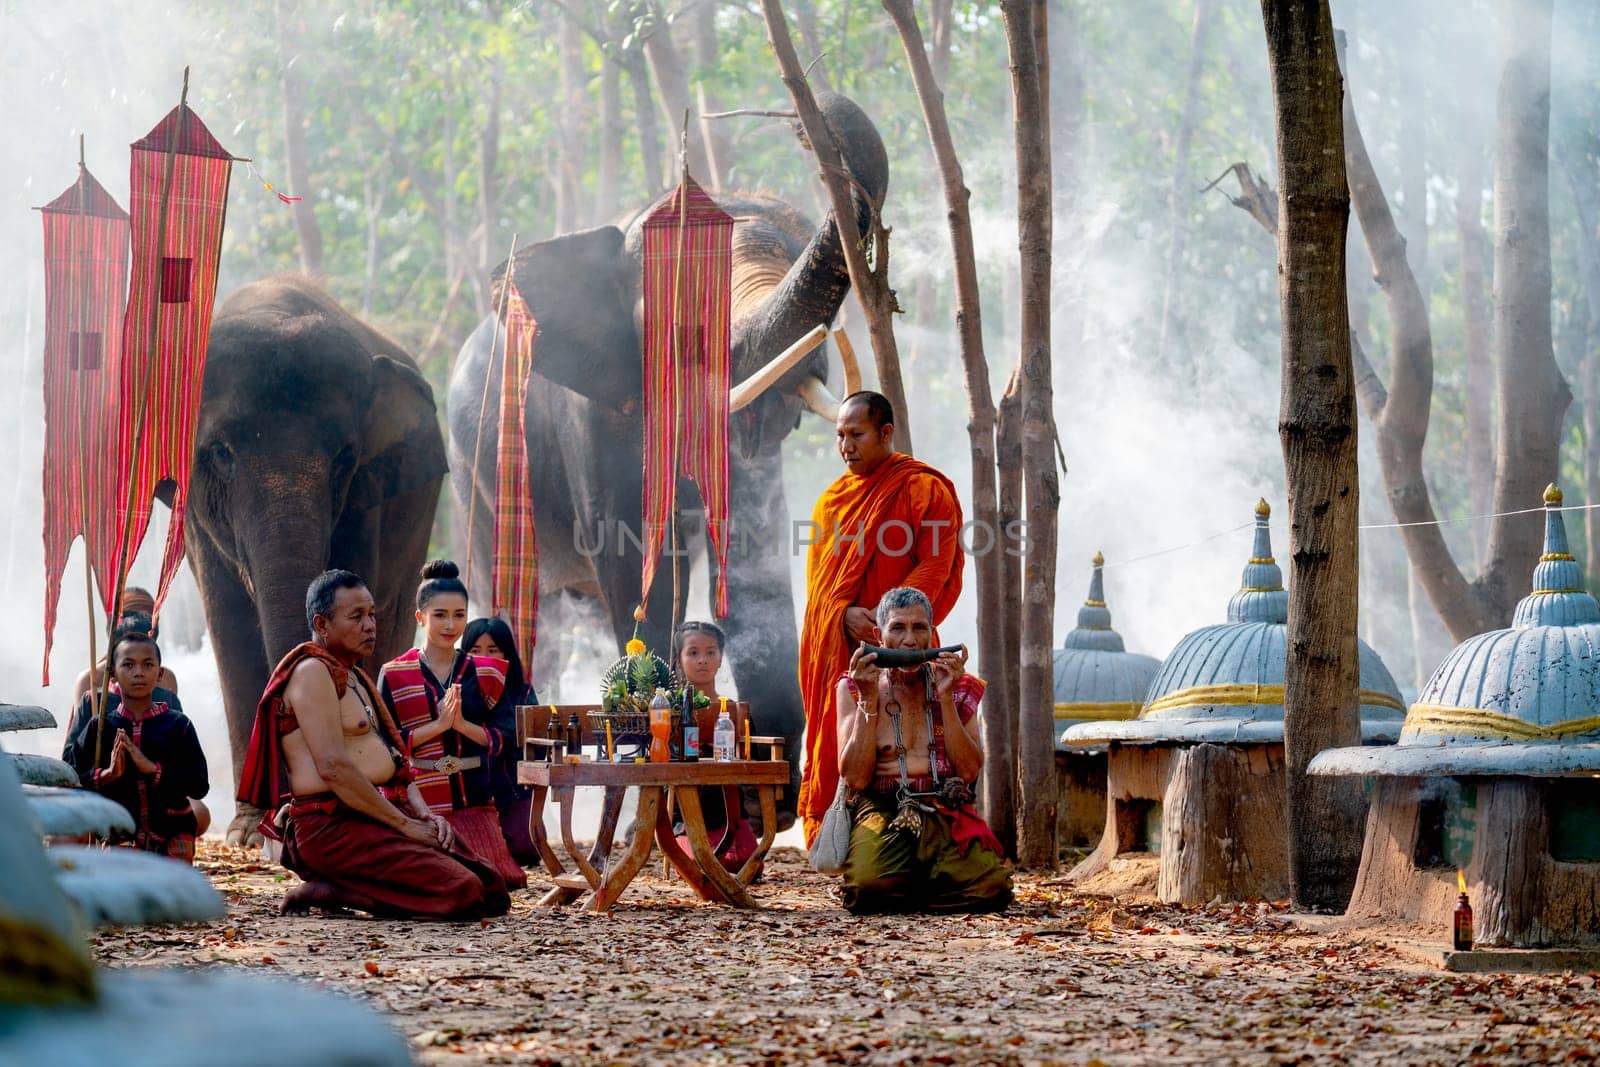 Group of people of mahout village join in traditional ceremony together in front of elephant and use old ivory as tools for the ceremony. by nrradmin